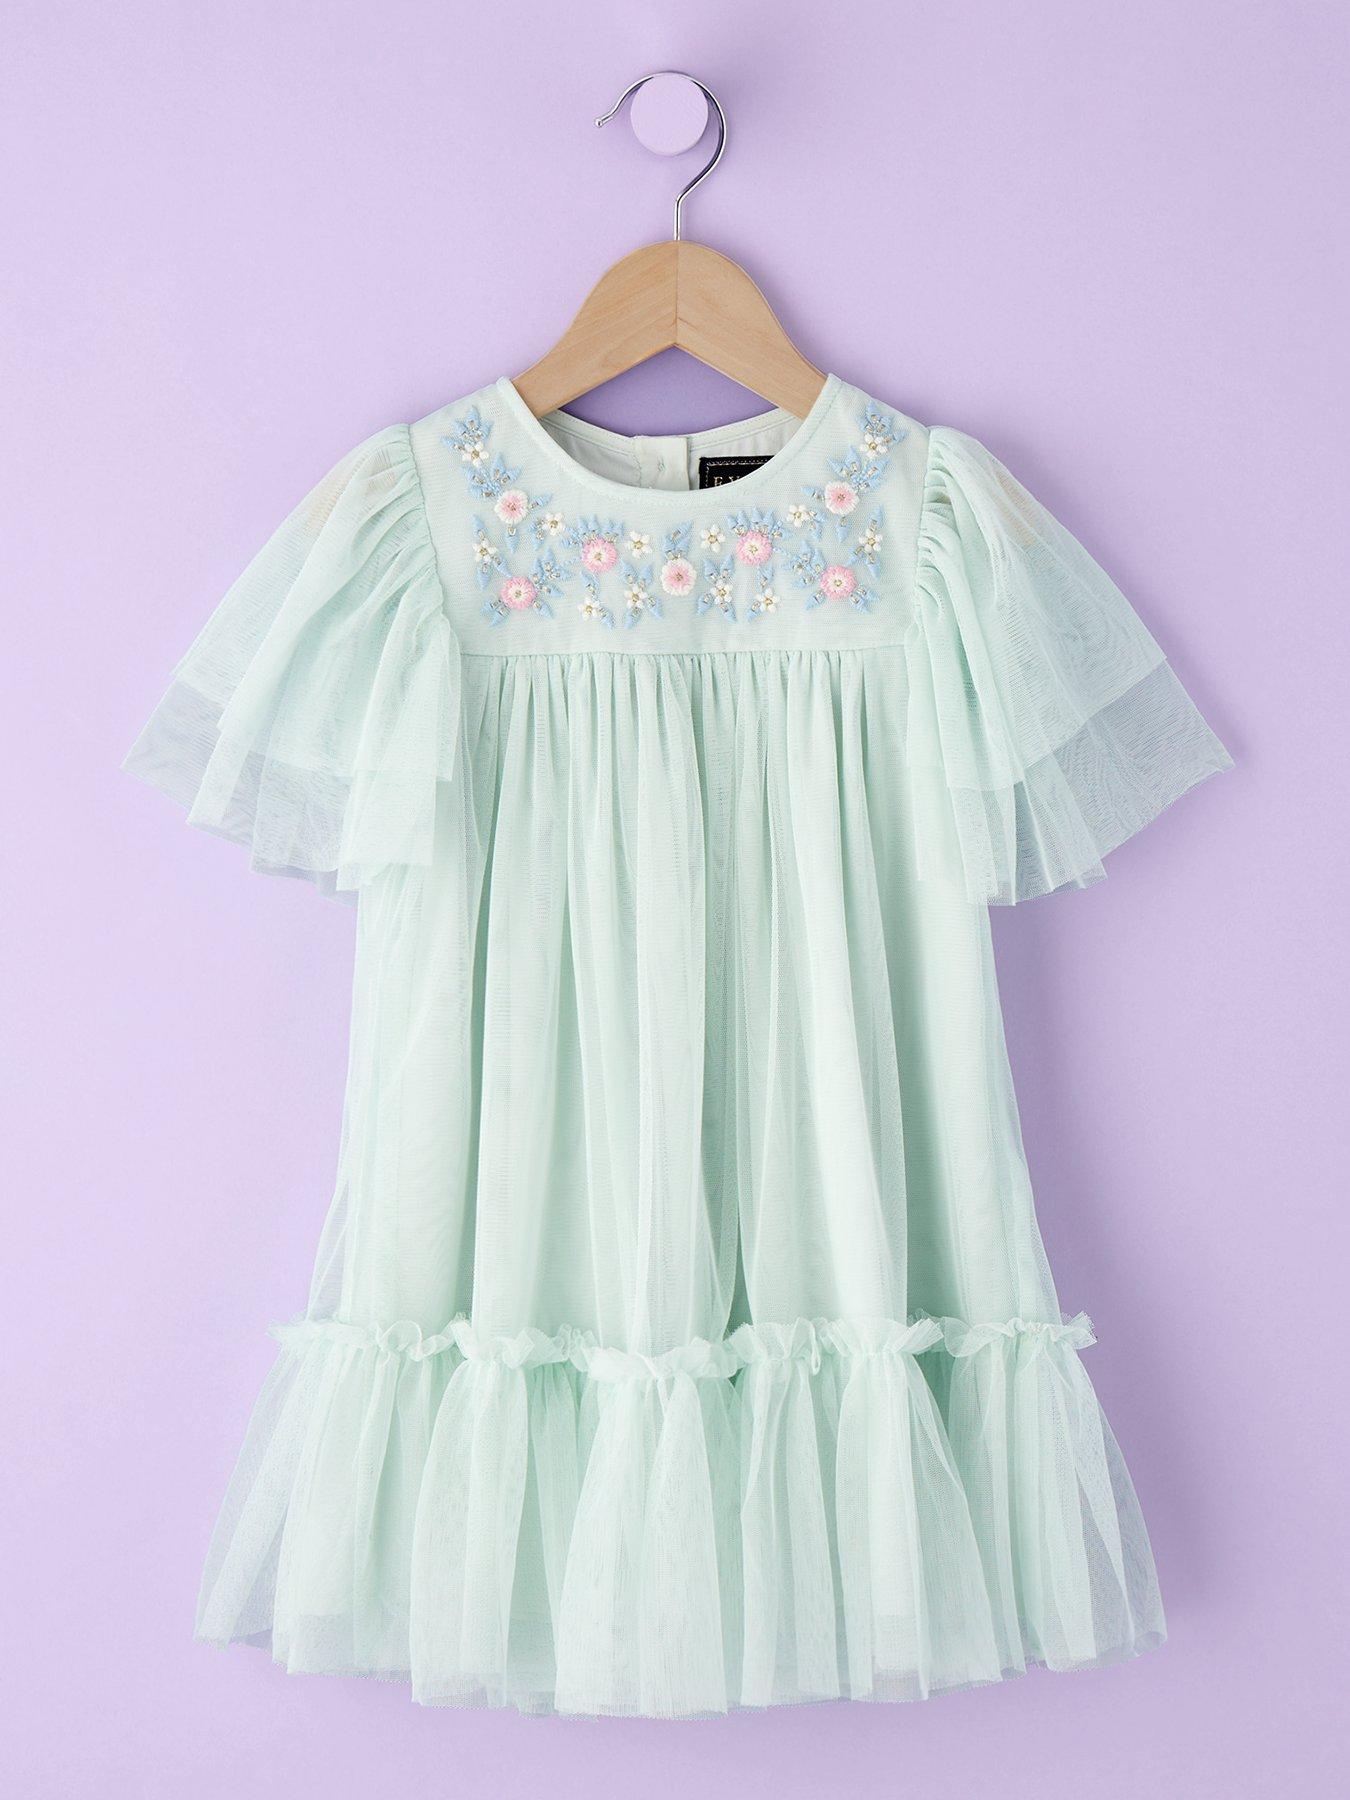 4-5 year old girl clothes